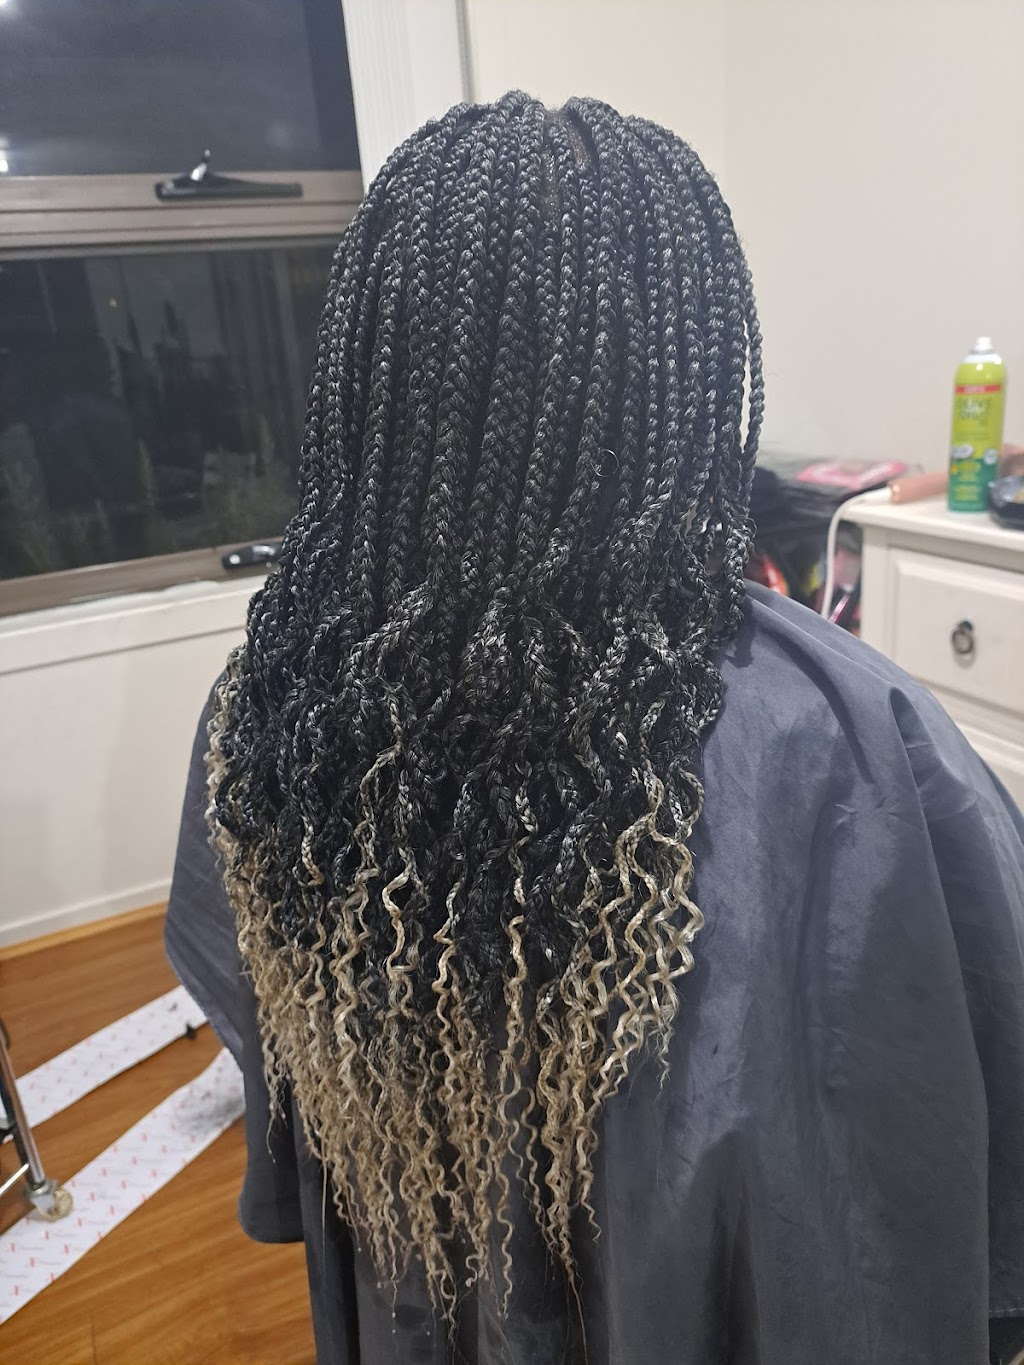 Act beauty braids hair styles and hair accessory | Helby St, Harrison ACT 2914, Australia | Phone: 0414 667 262